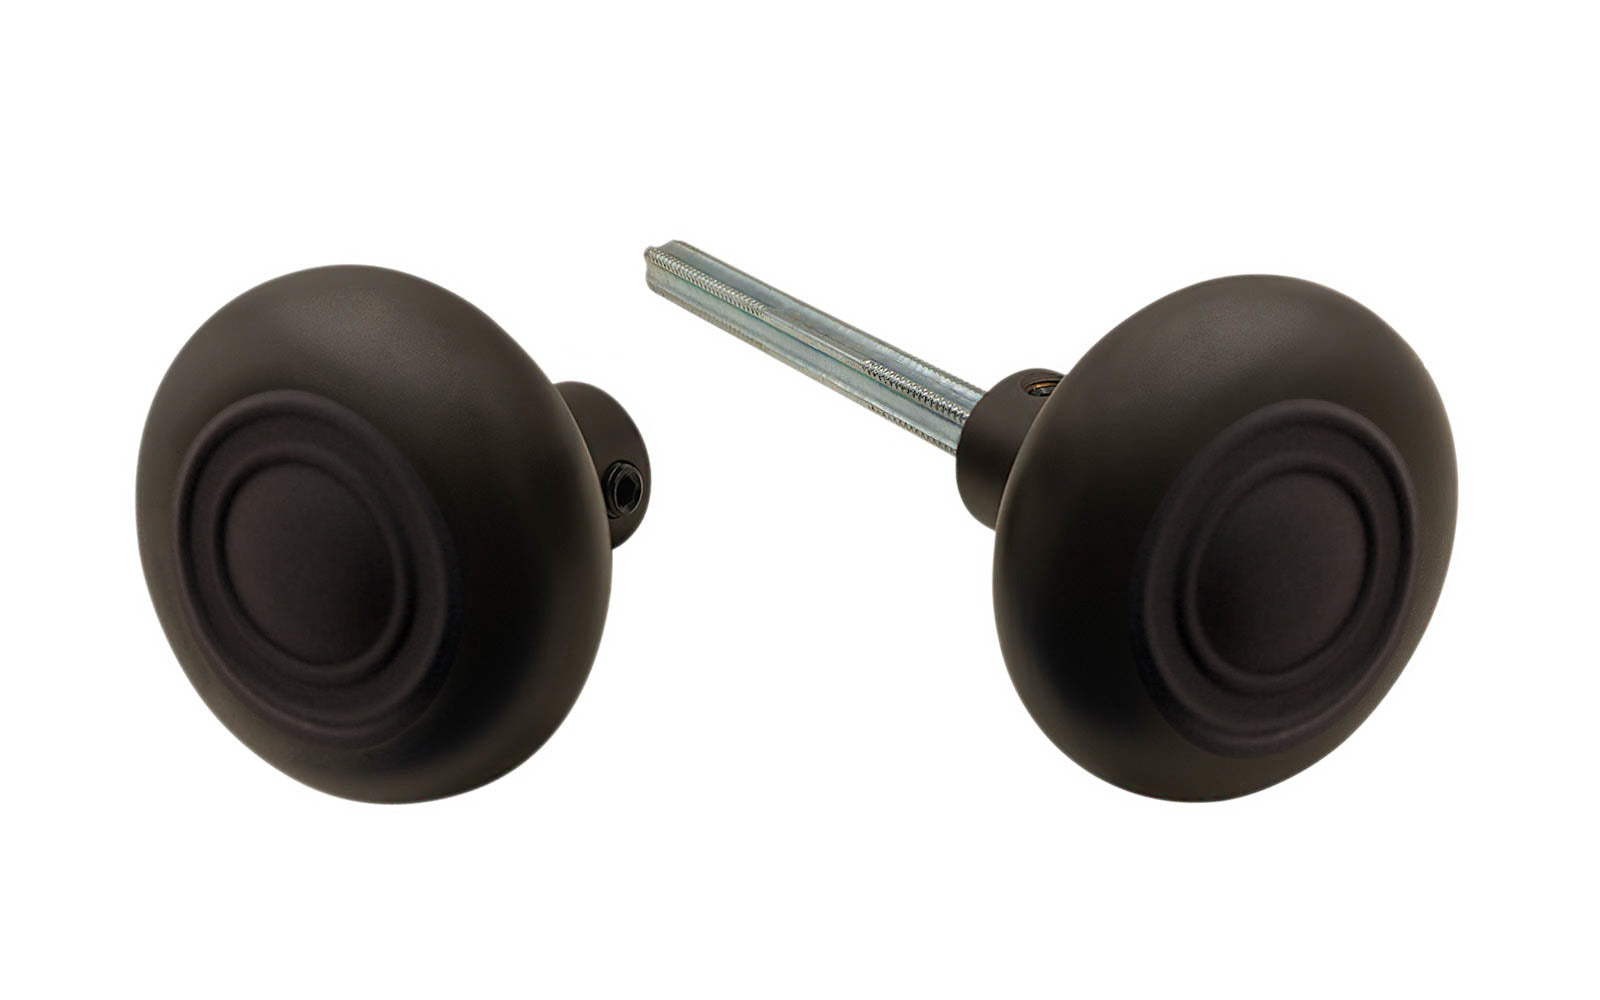 Pair of Traditional & Classic Brass Circle-Ring Design Doorknobs with spindle. Quality hollow core wrought brass doorknobs with an attractive circle-ring design. Reproduction Brass Door Knobs. Traditional Brass Knobs with Spindle. Set includes two knobs with spindle. Oil Rubbed Bronze Finish.